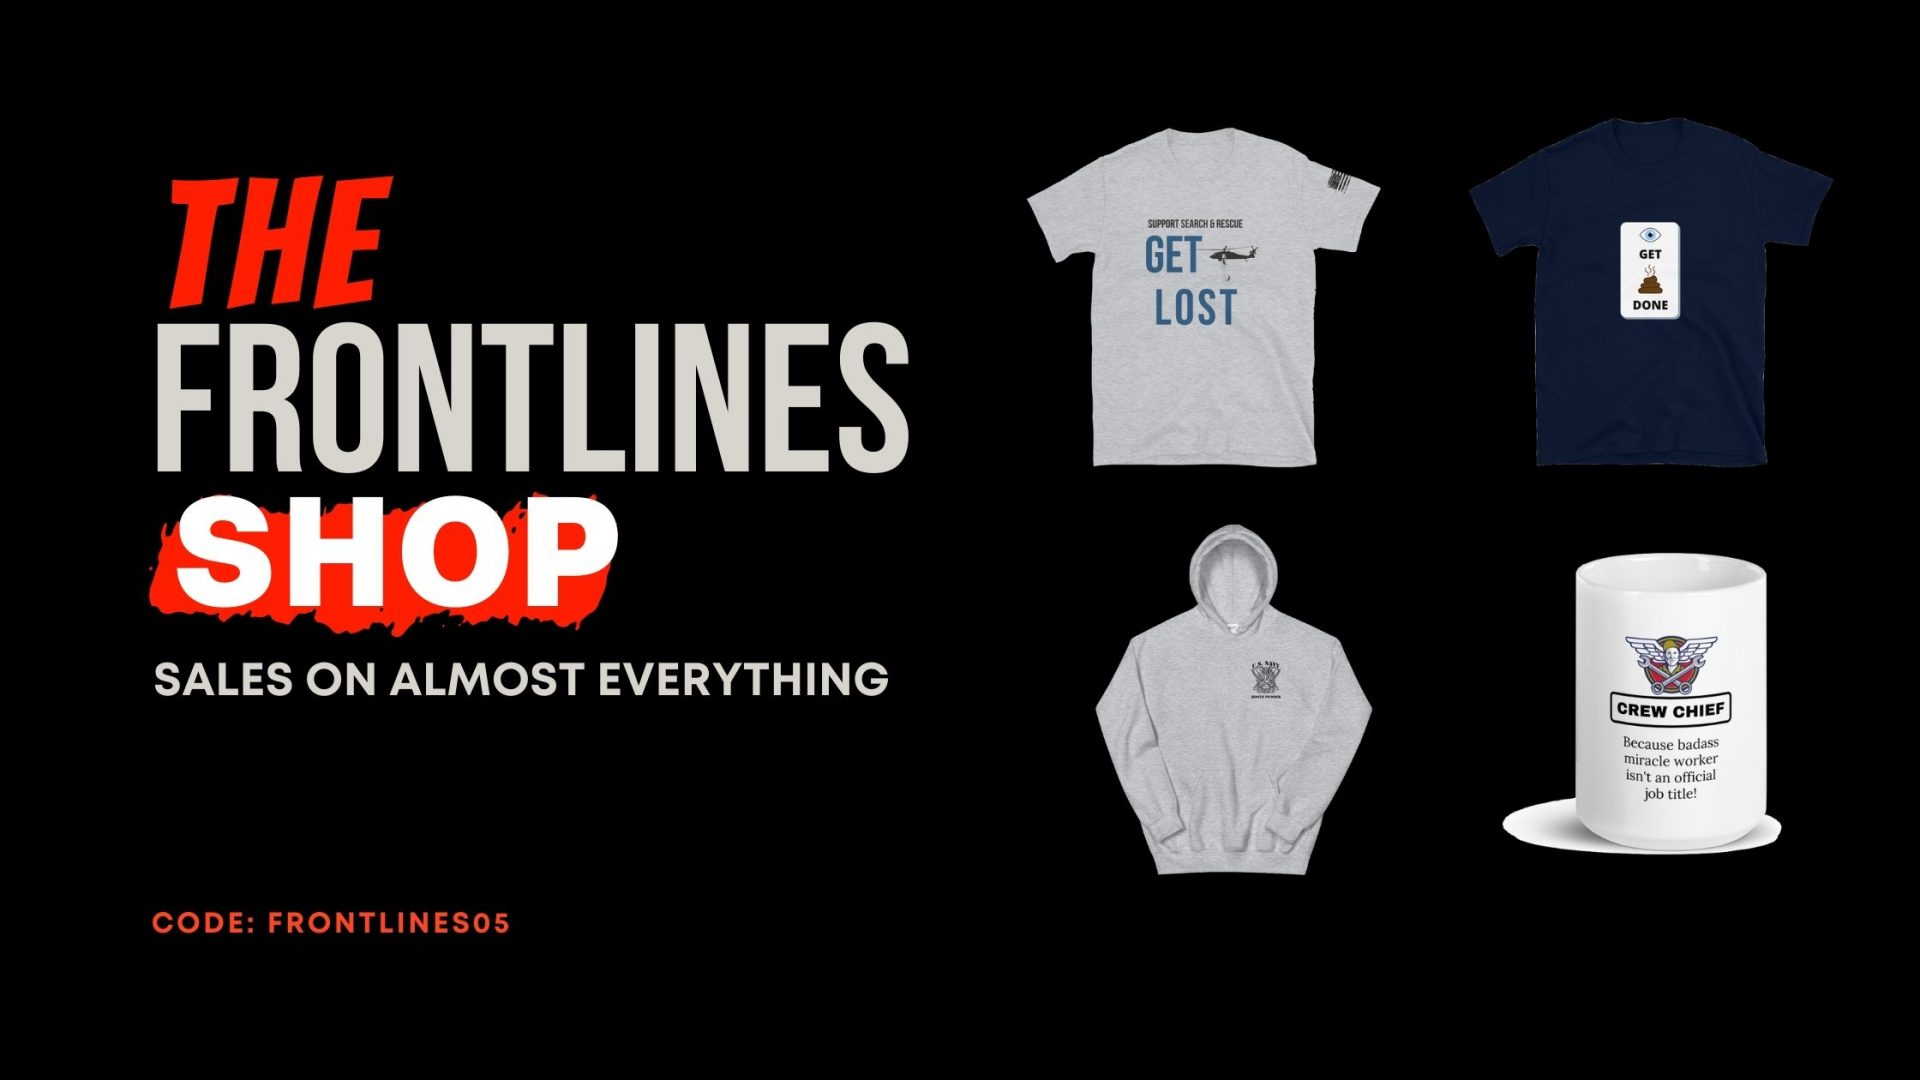 The Frontlines Shop for military apparel, shirts, hoodies and coffee cups.